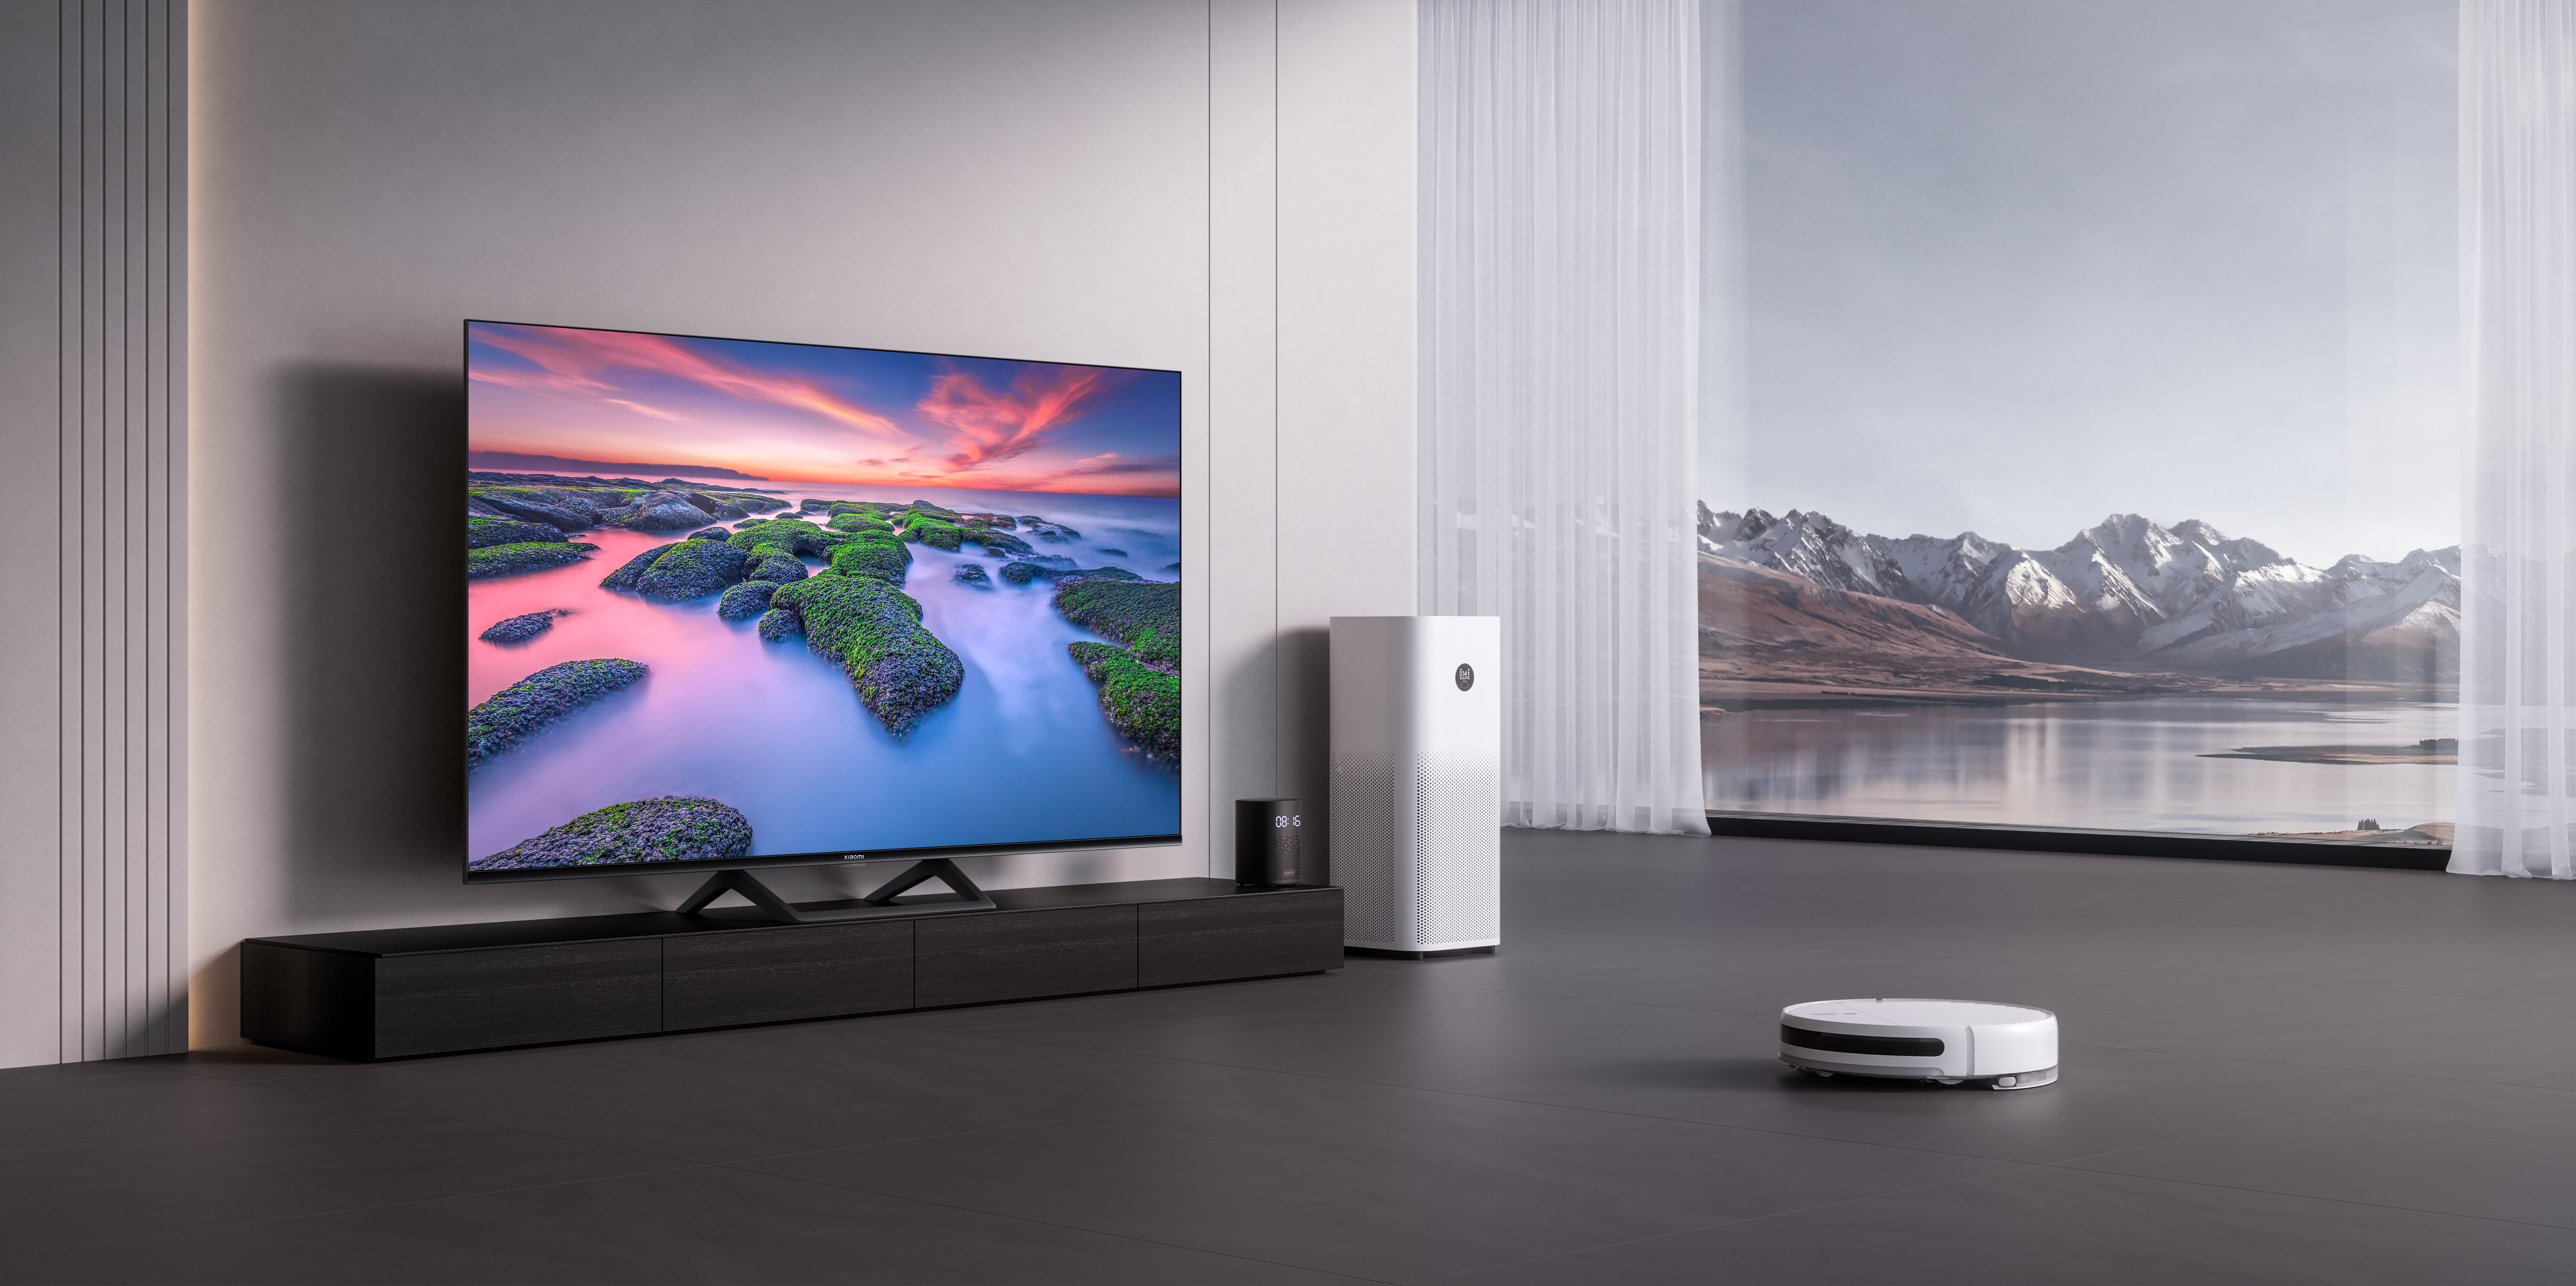 Xiaomi TV A2 Series With 60Hz Refresh Rate, Dolby Vision Support Launched